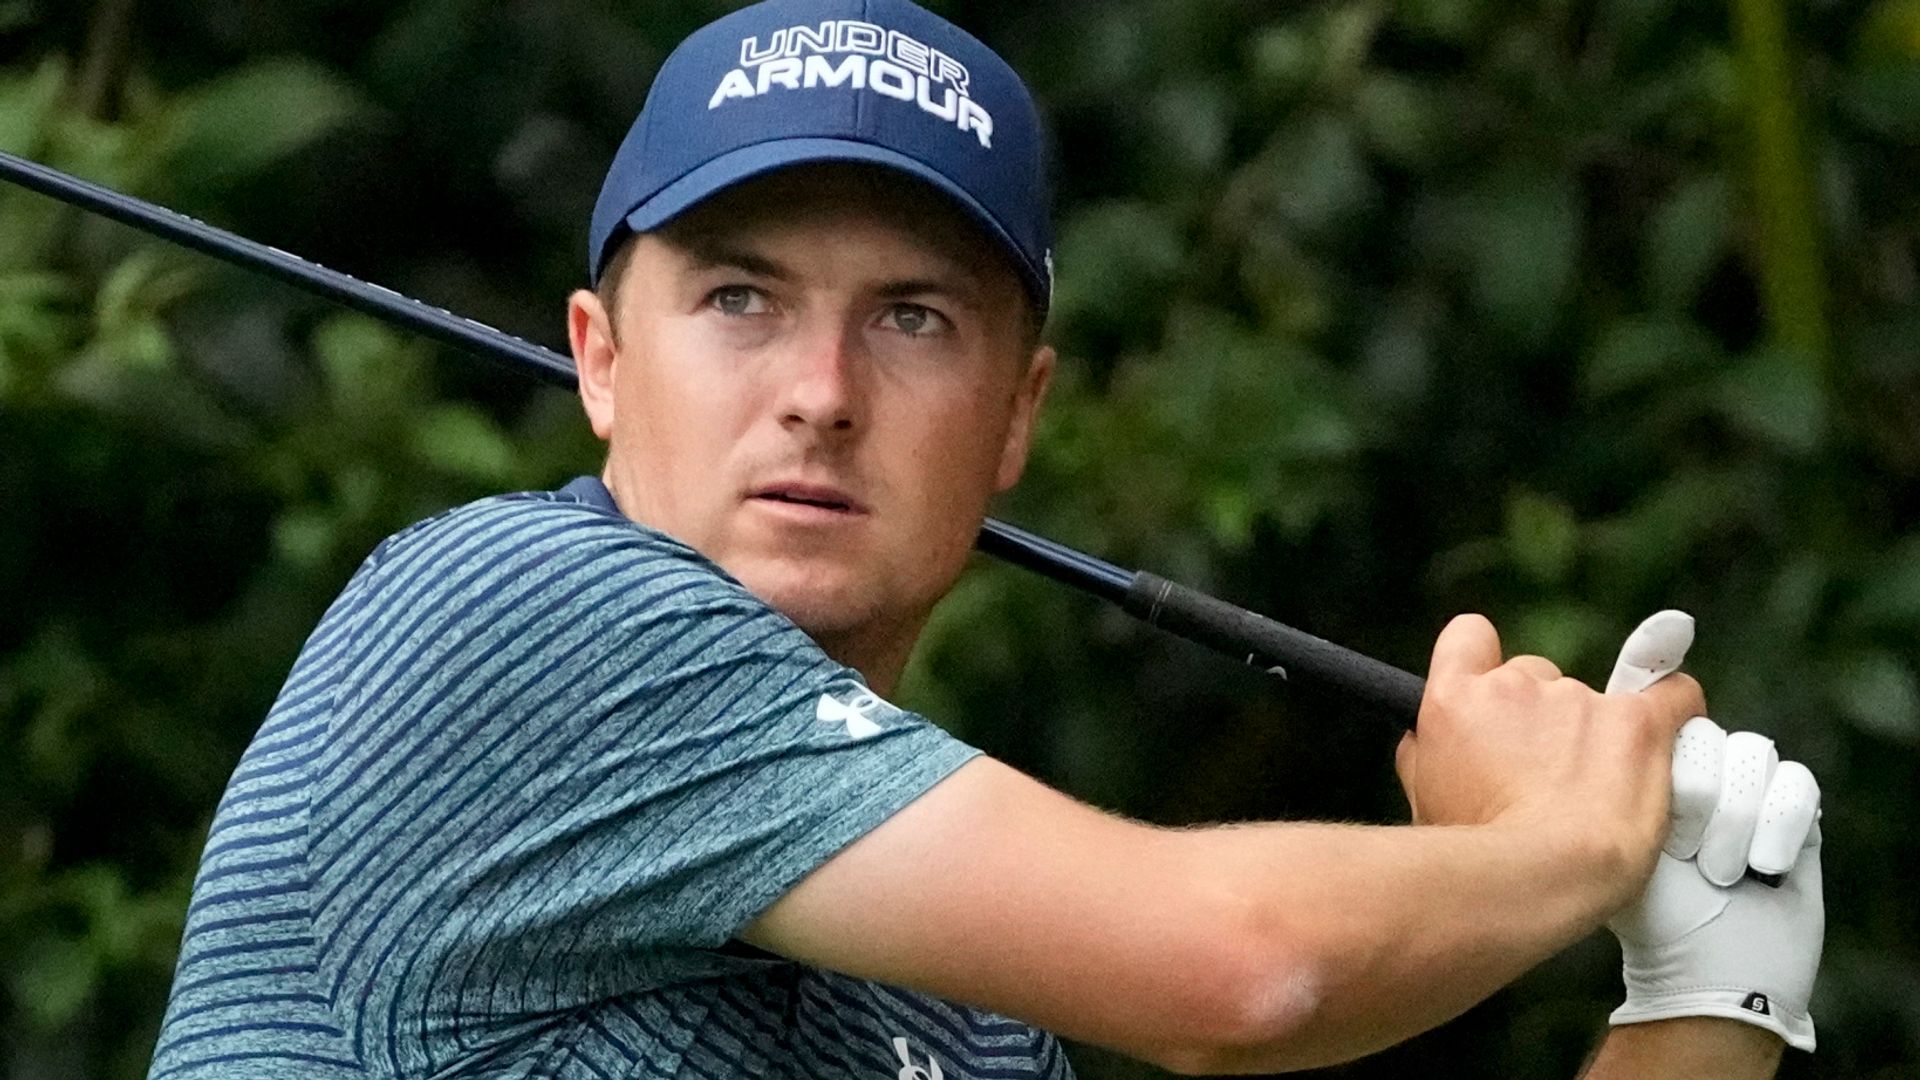 The Masters: Jordan Spieth ready to challenge for victory as Justin Thomas enjoys 'easy' day